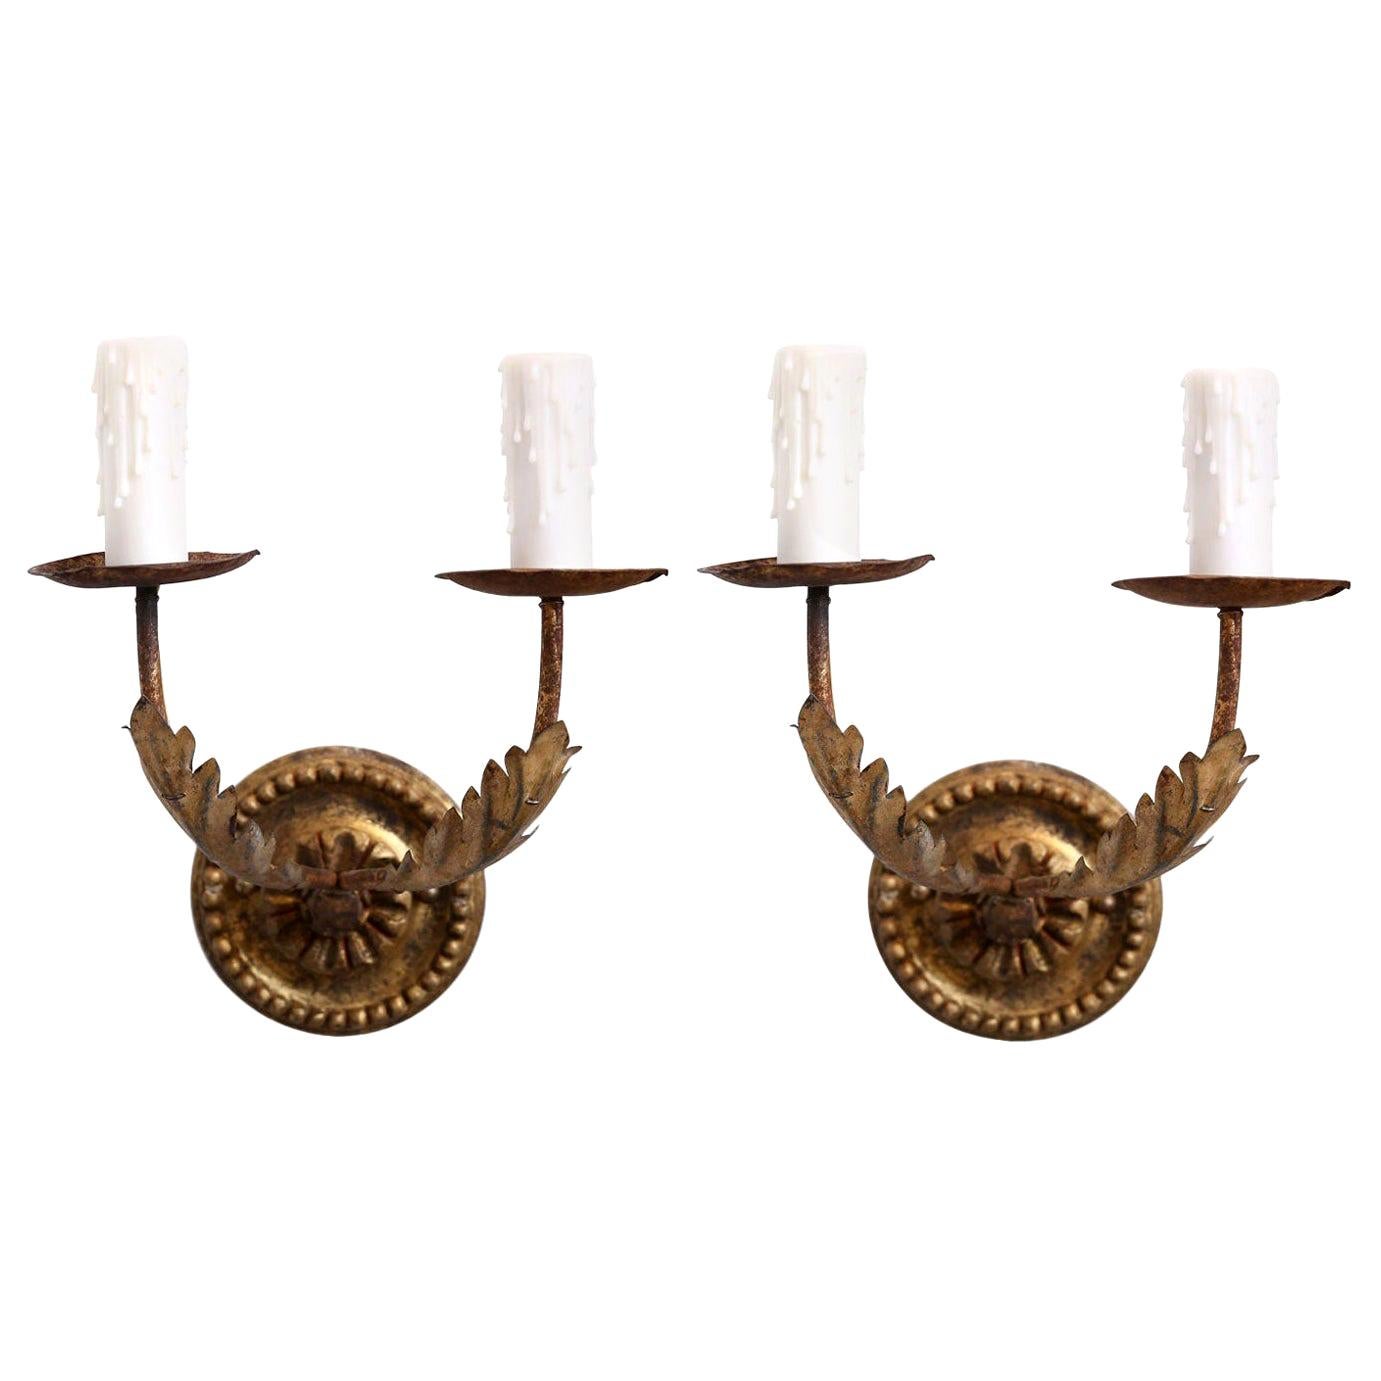 Pair of Petite Gilt-Tole French Sconces